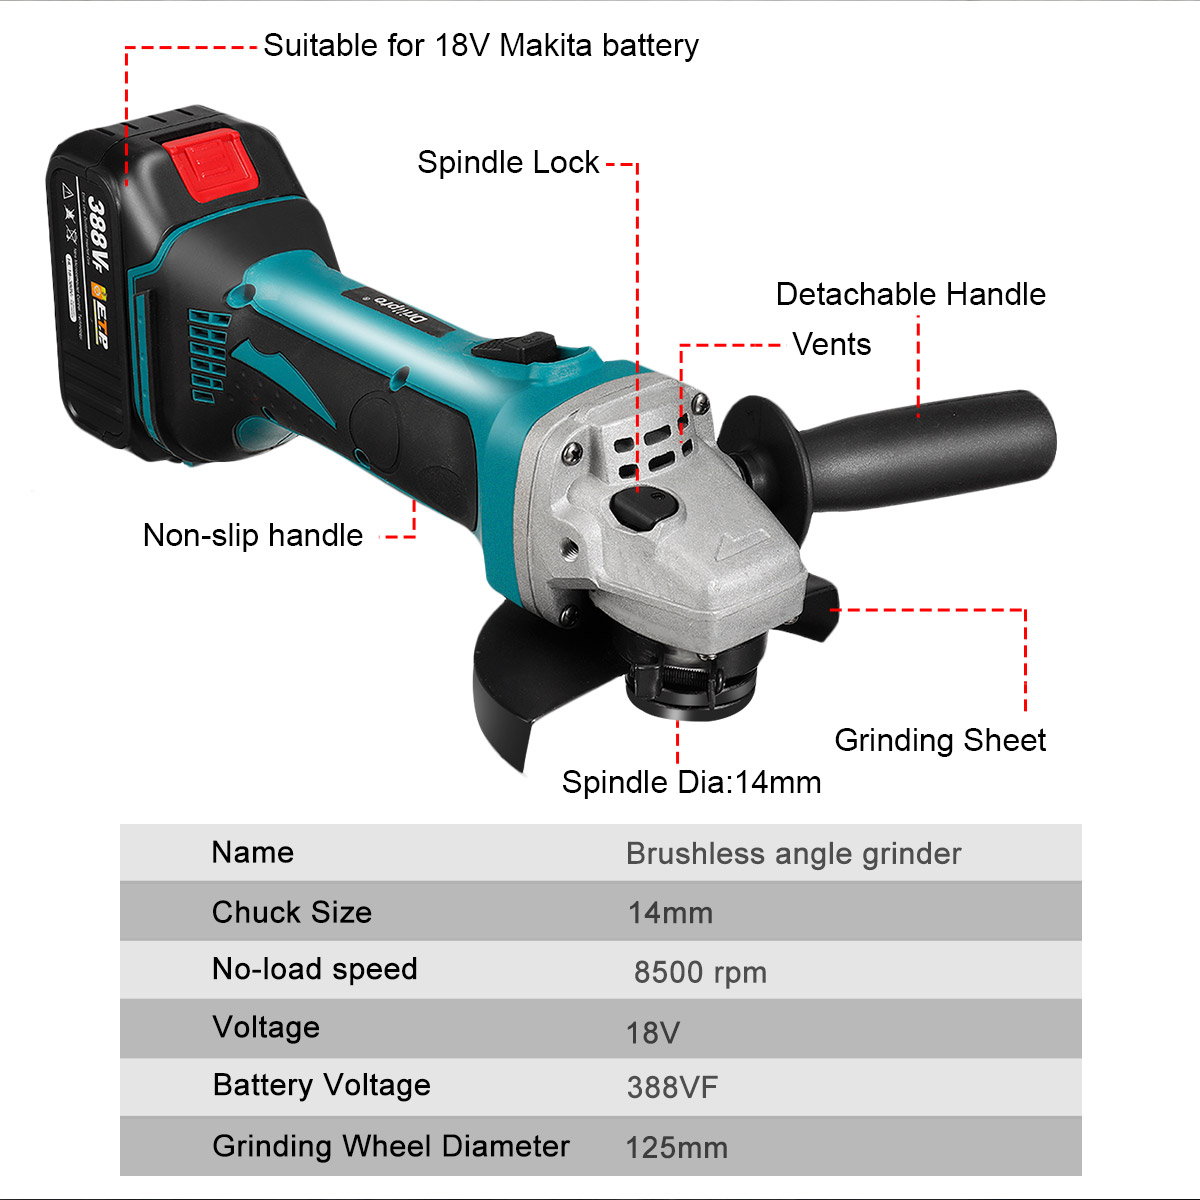 Drillpro-388VF-125mm-BlueBalck-Brushless-Motor-8500rpm-800W-Compact-Lithium-Electric-Polisher-1962696-2